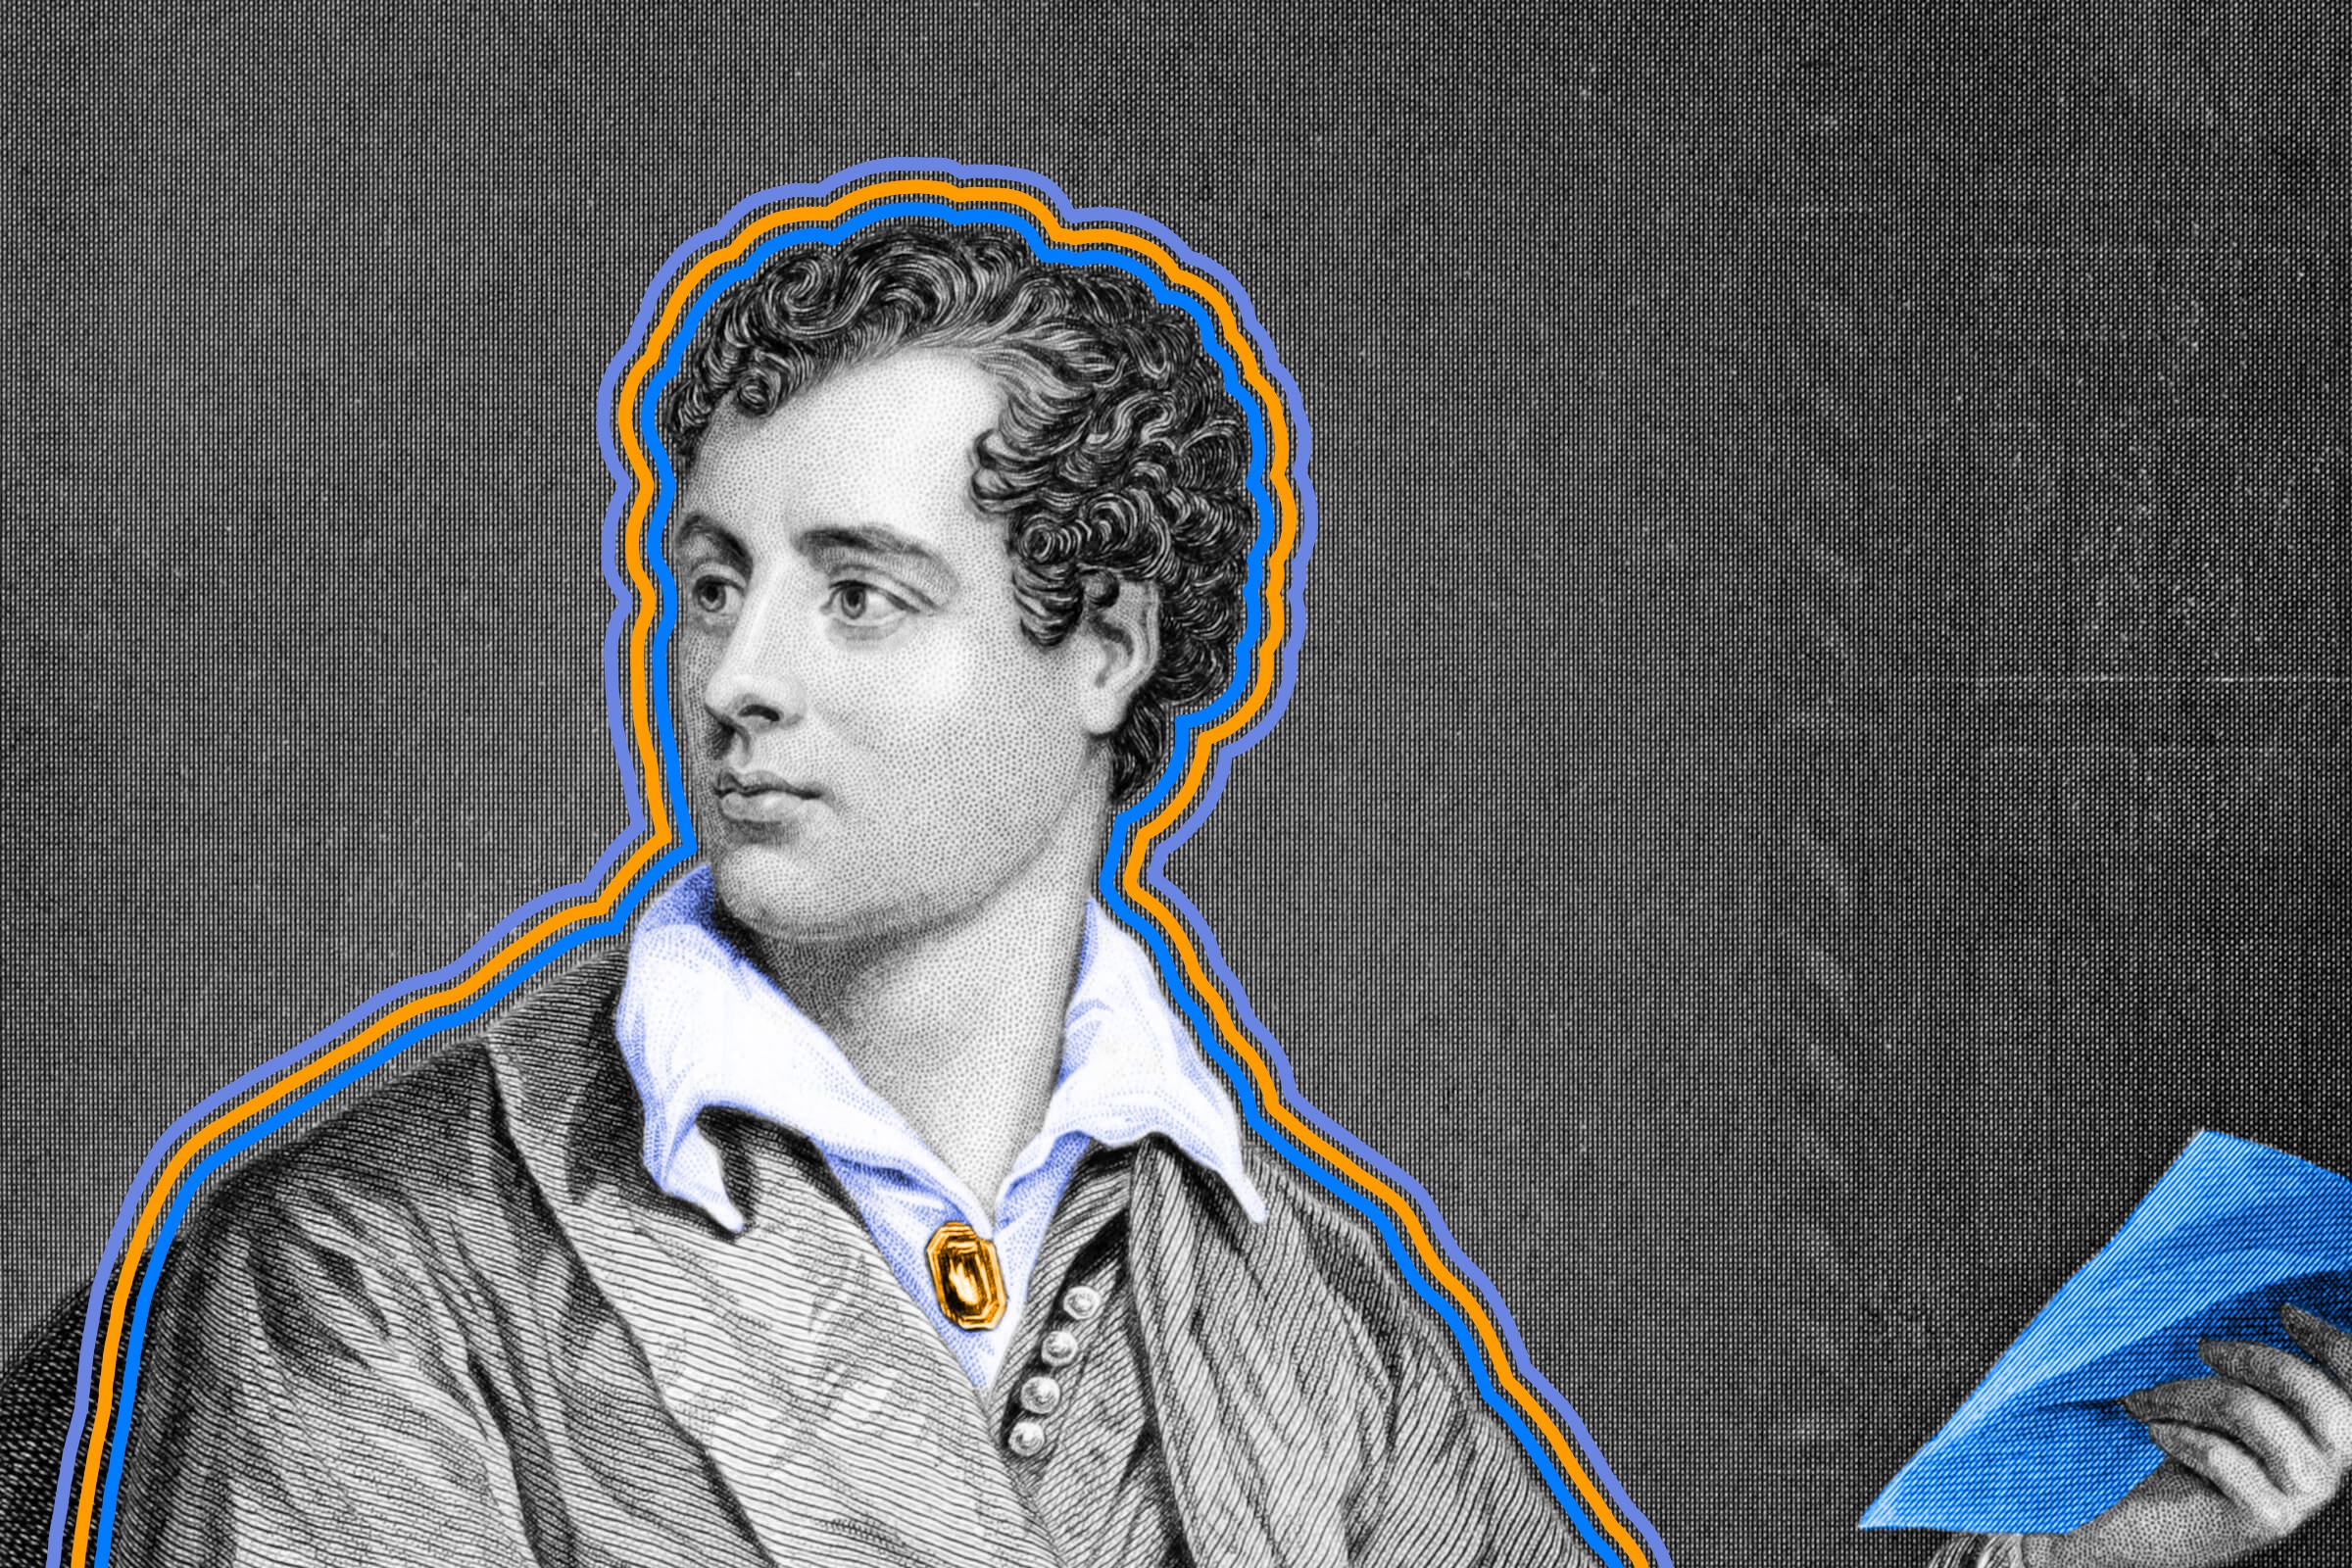 Lord Byron reportedly kept a bear in his room at Cambridge because the rules forbade dogs.